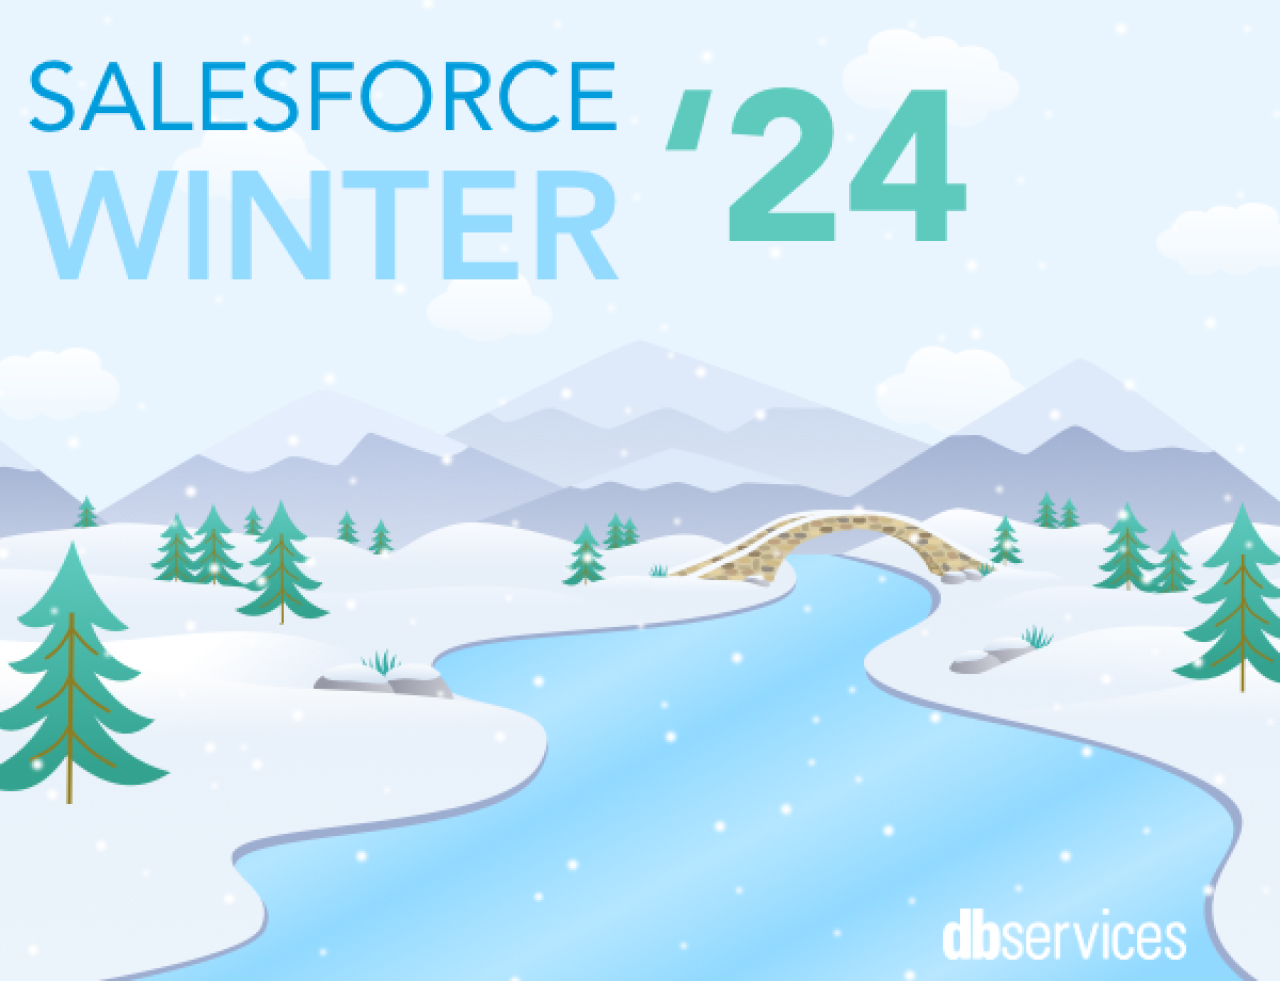 salesforce winter 24 release notes db services.